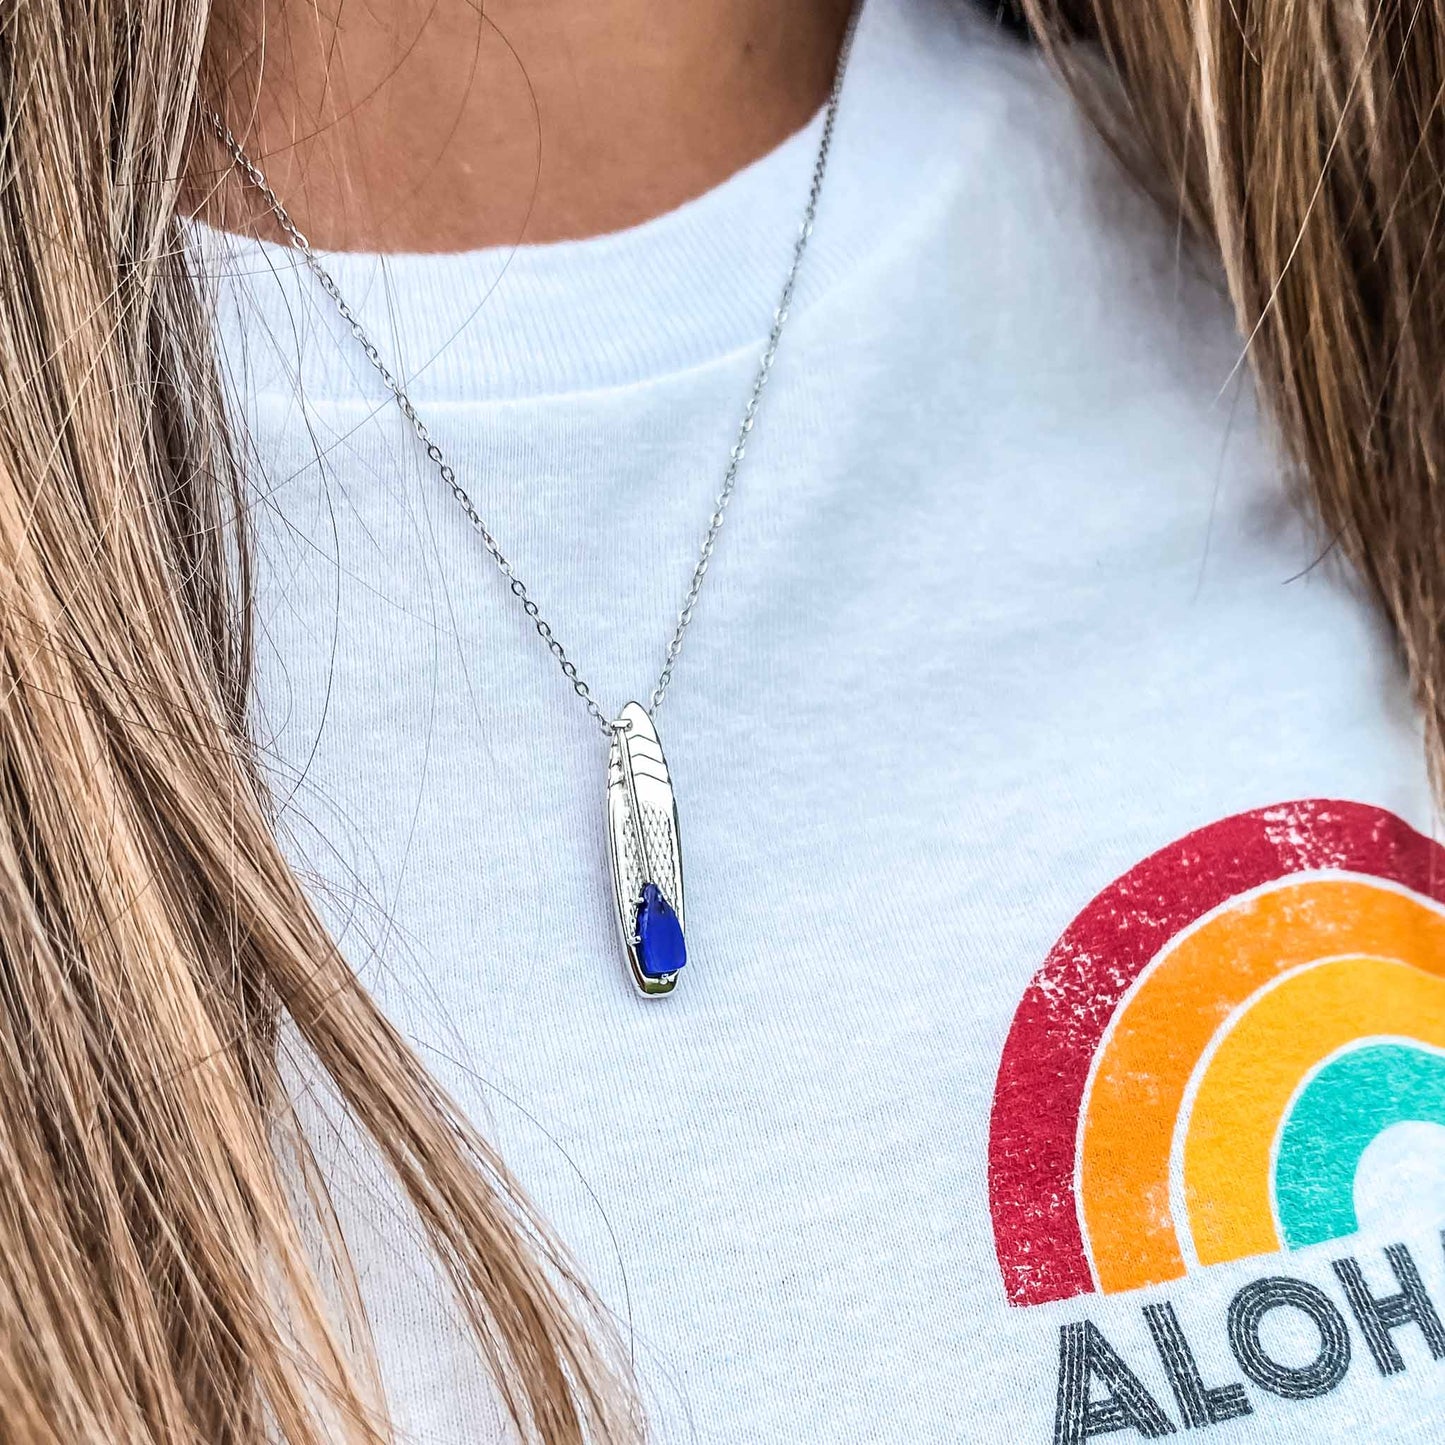 Looking for places to buy or rent a paddle board? This stand up paddle board pendant will be the best and highest performance SUP you'll ever find. Take your paddle board with you, even when you're not surfing, racing or touring. Shop September's birthstone SUP jewelry online or at a surf shop near you